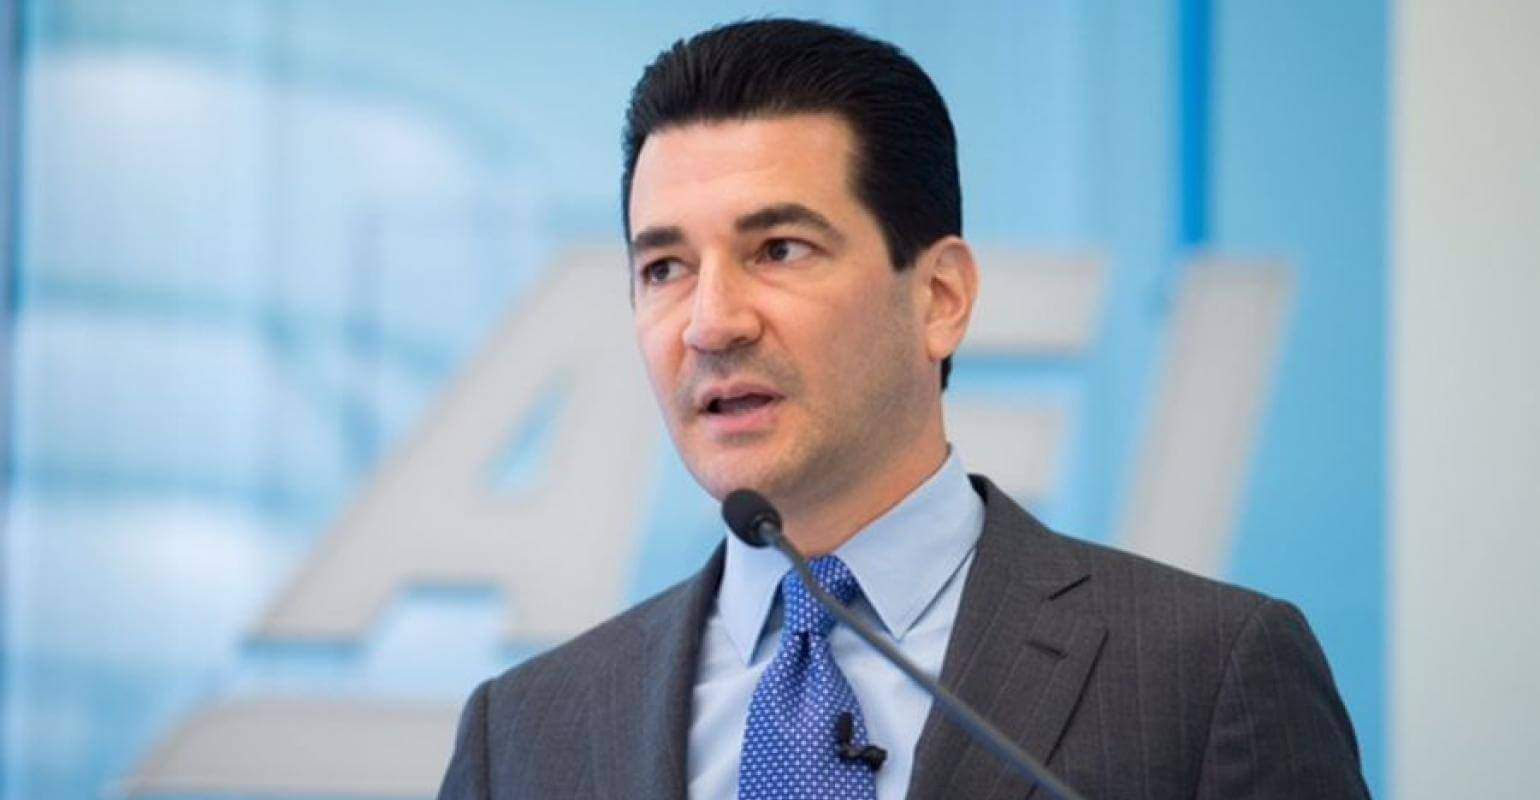 Scott Gottlieb Believes Booster Dose Is Necessary As The Delta Variant Tears Through The Immunity Of People